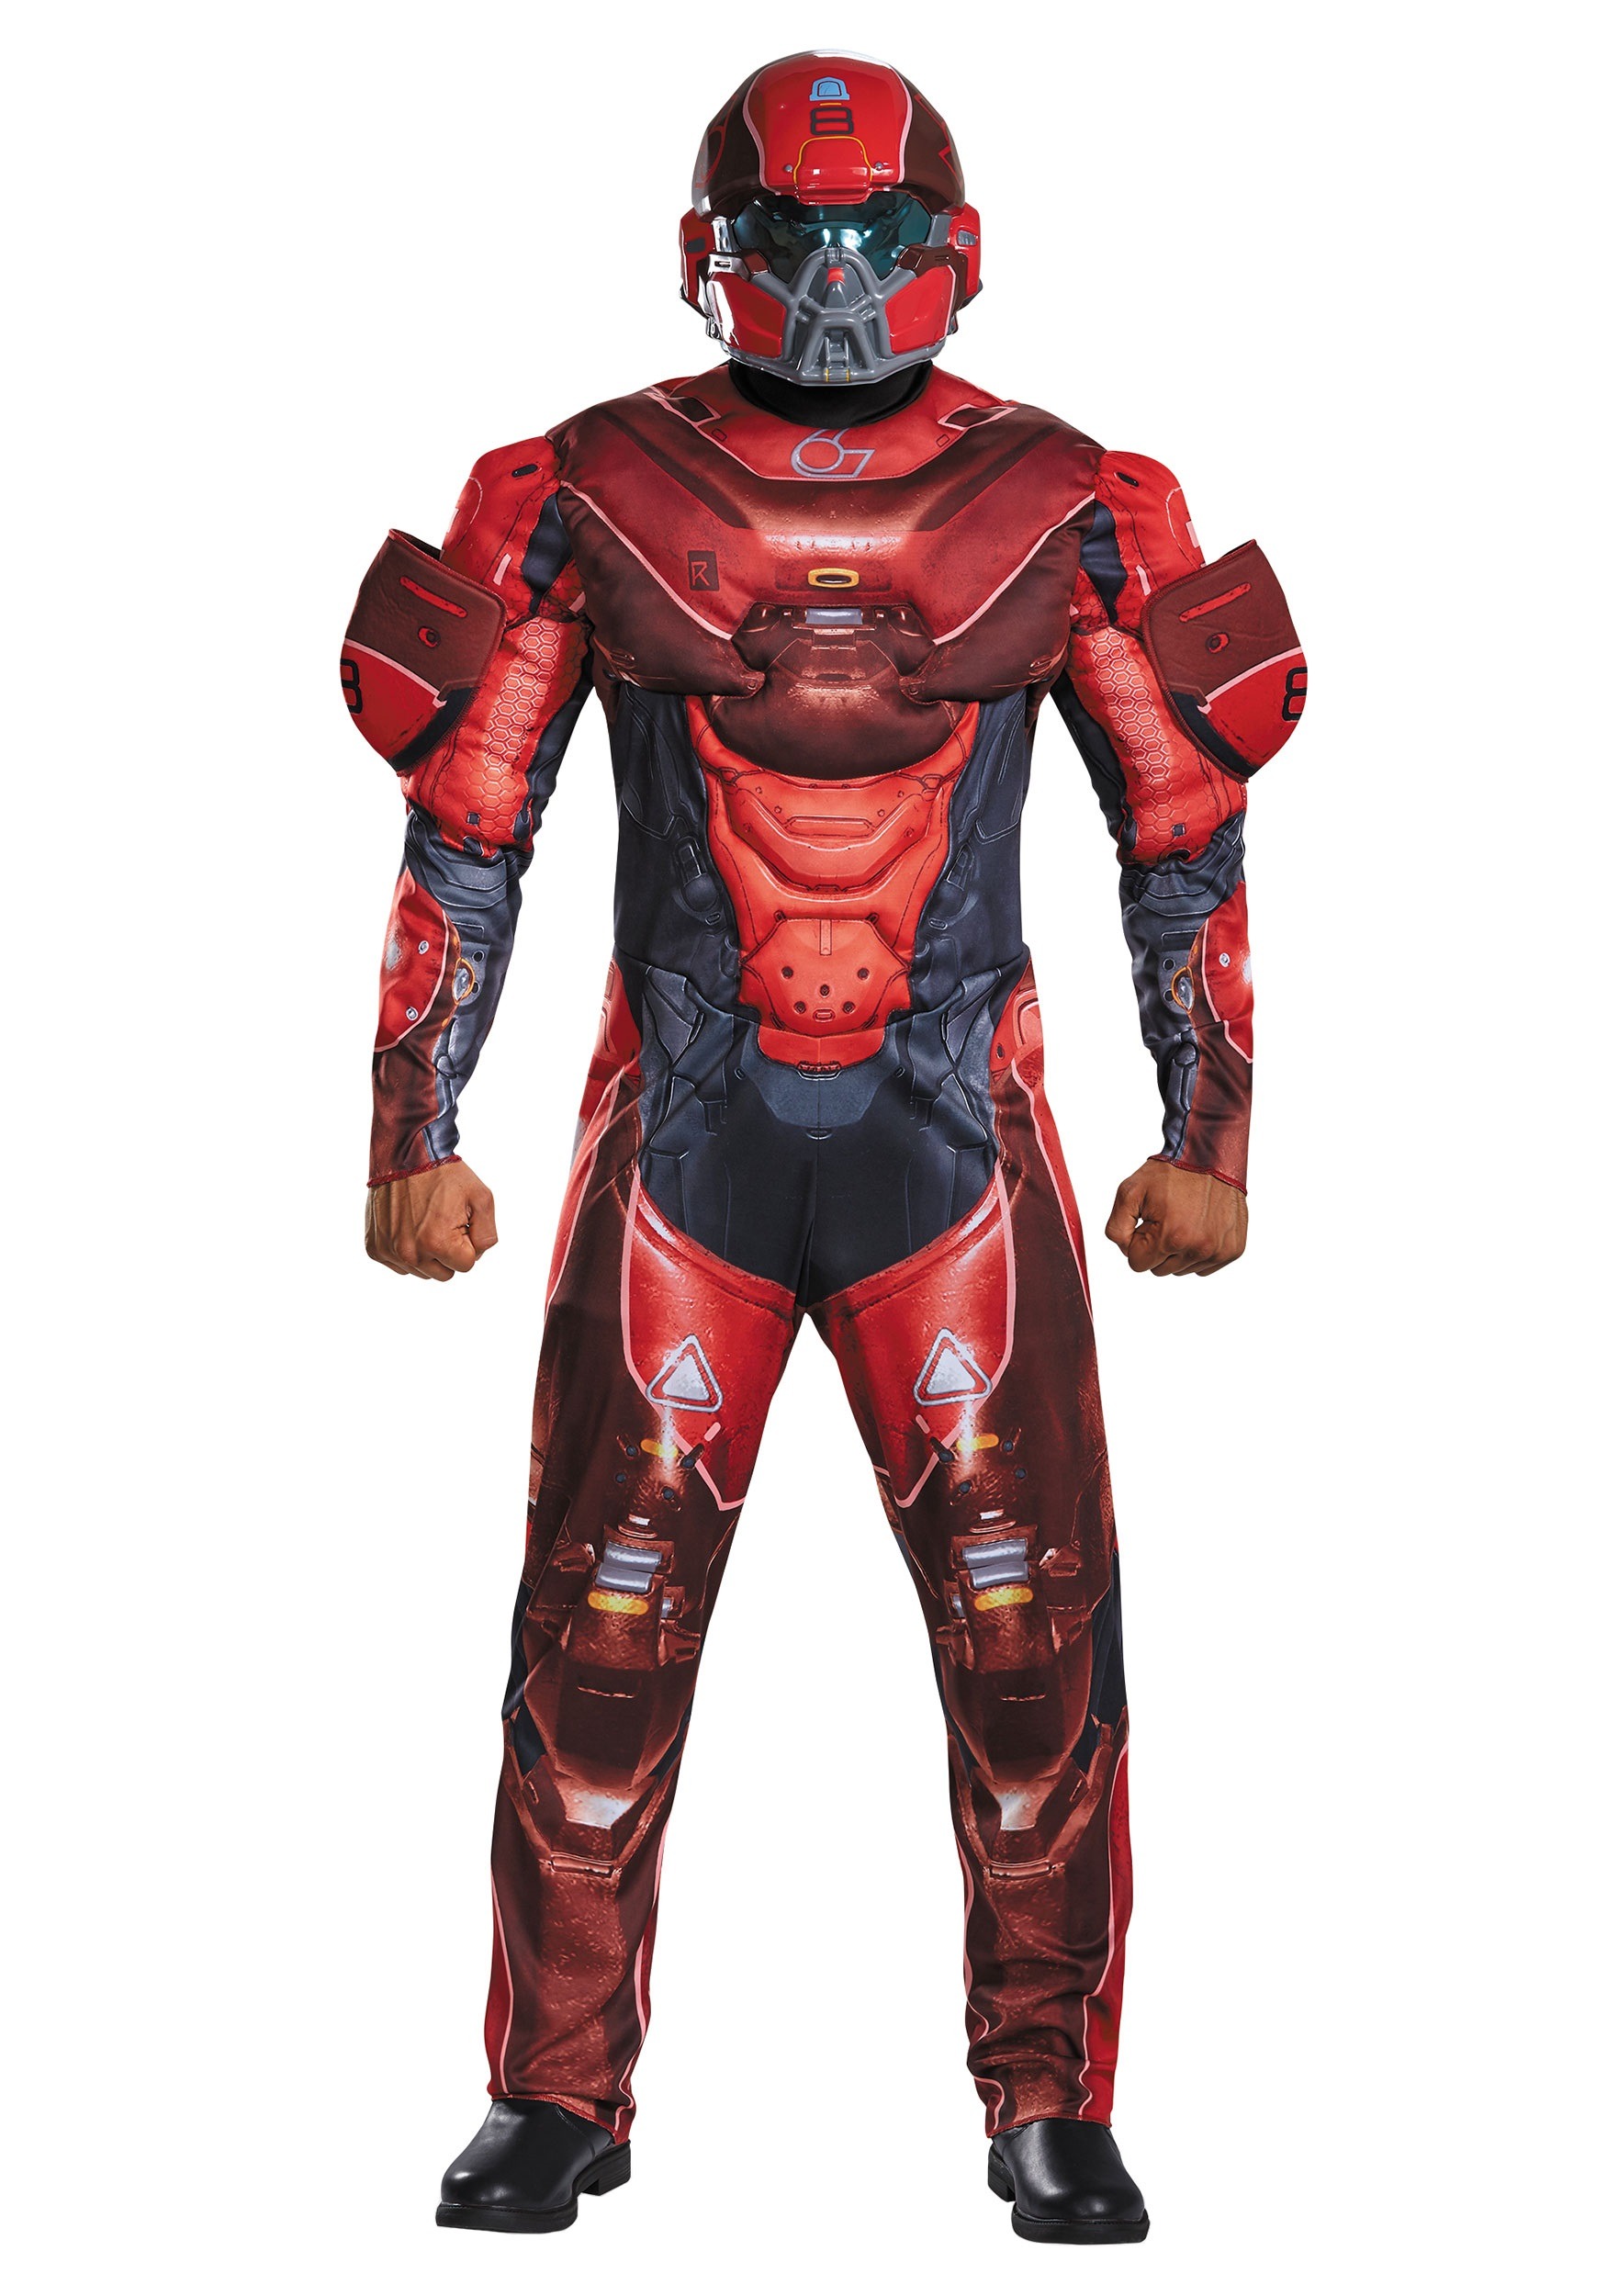 spider toddler suit man Adult Spartan Red Chest Muscle Costume